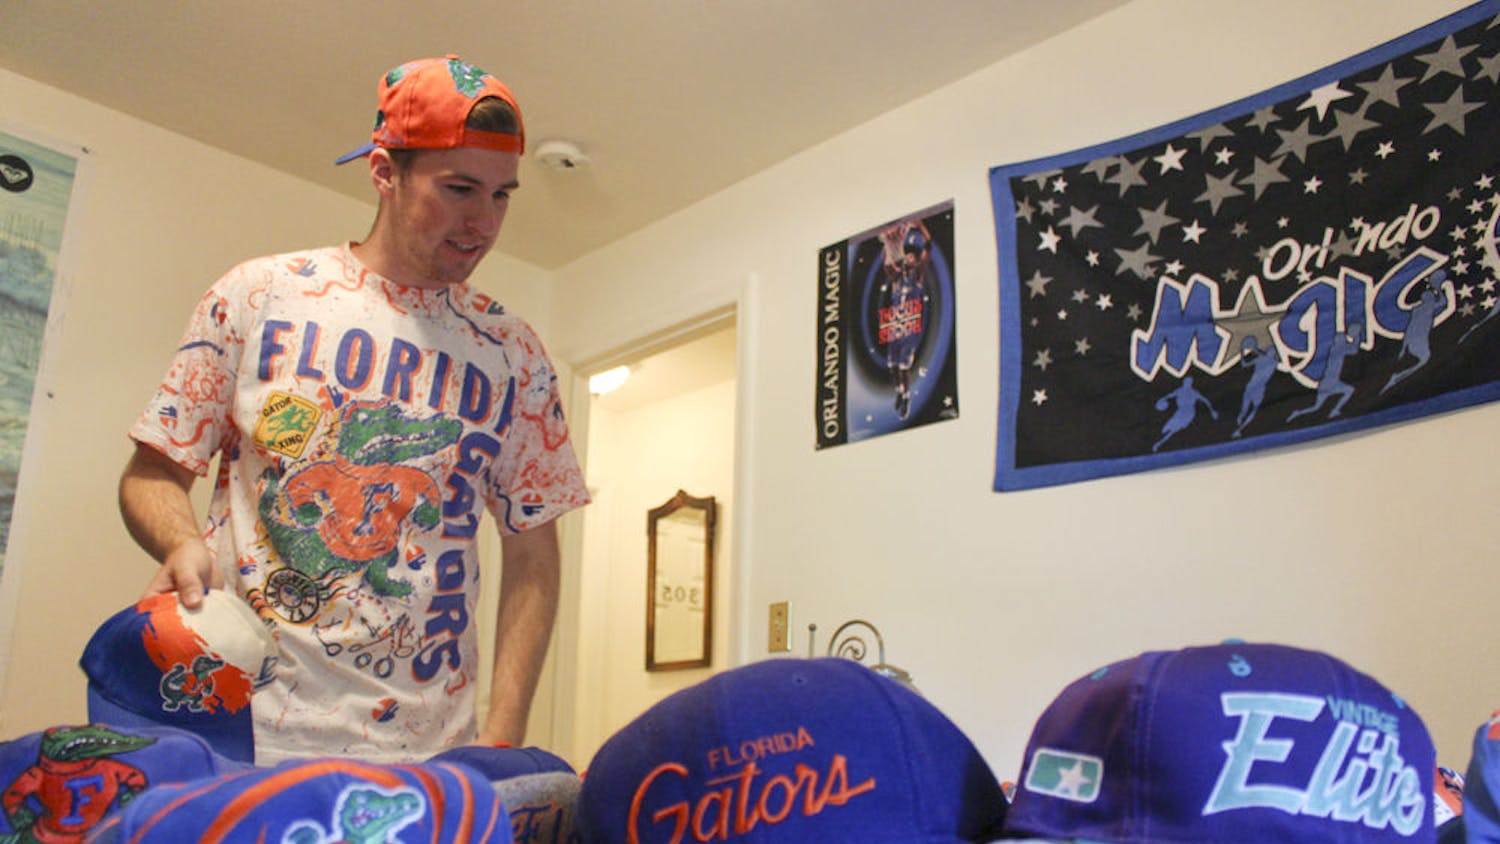 Josh Rittenour, a 20-year-old UF economics junior, lays out a portion of sports hats that he has collected through thrifting at his house on Sept. 24, 2015. Rittenour restores the old hats. “It’s something that I have and can bring back to life and let someone else enjoy as much as the original person,” he said.